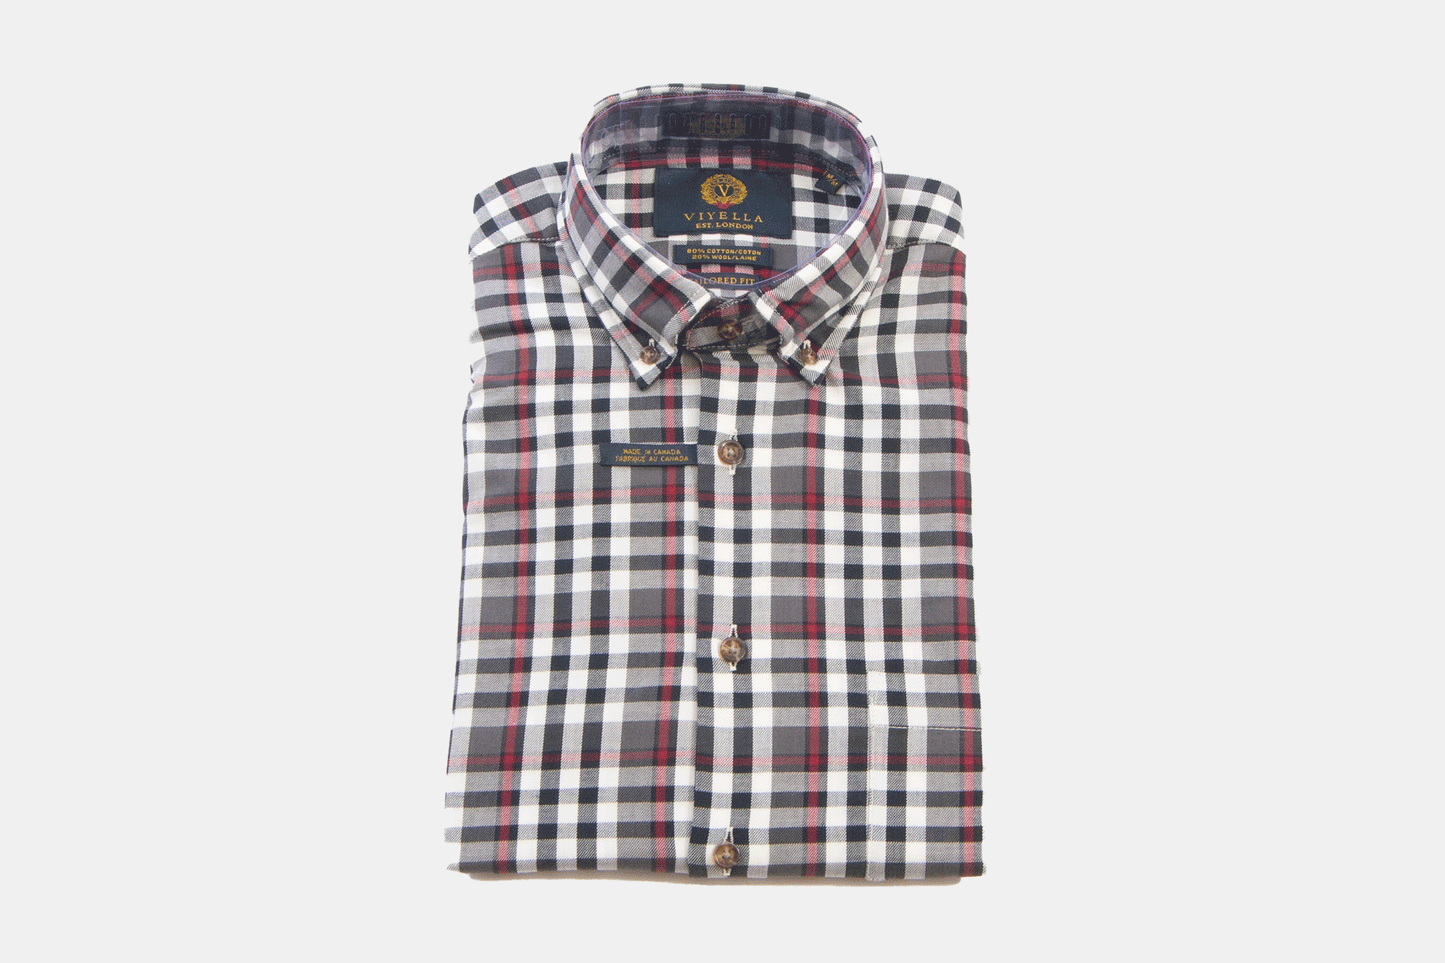 khakis of Carmel - brown plaid shirt with red accents